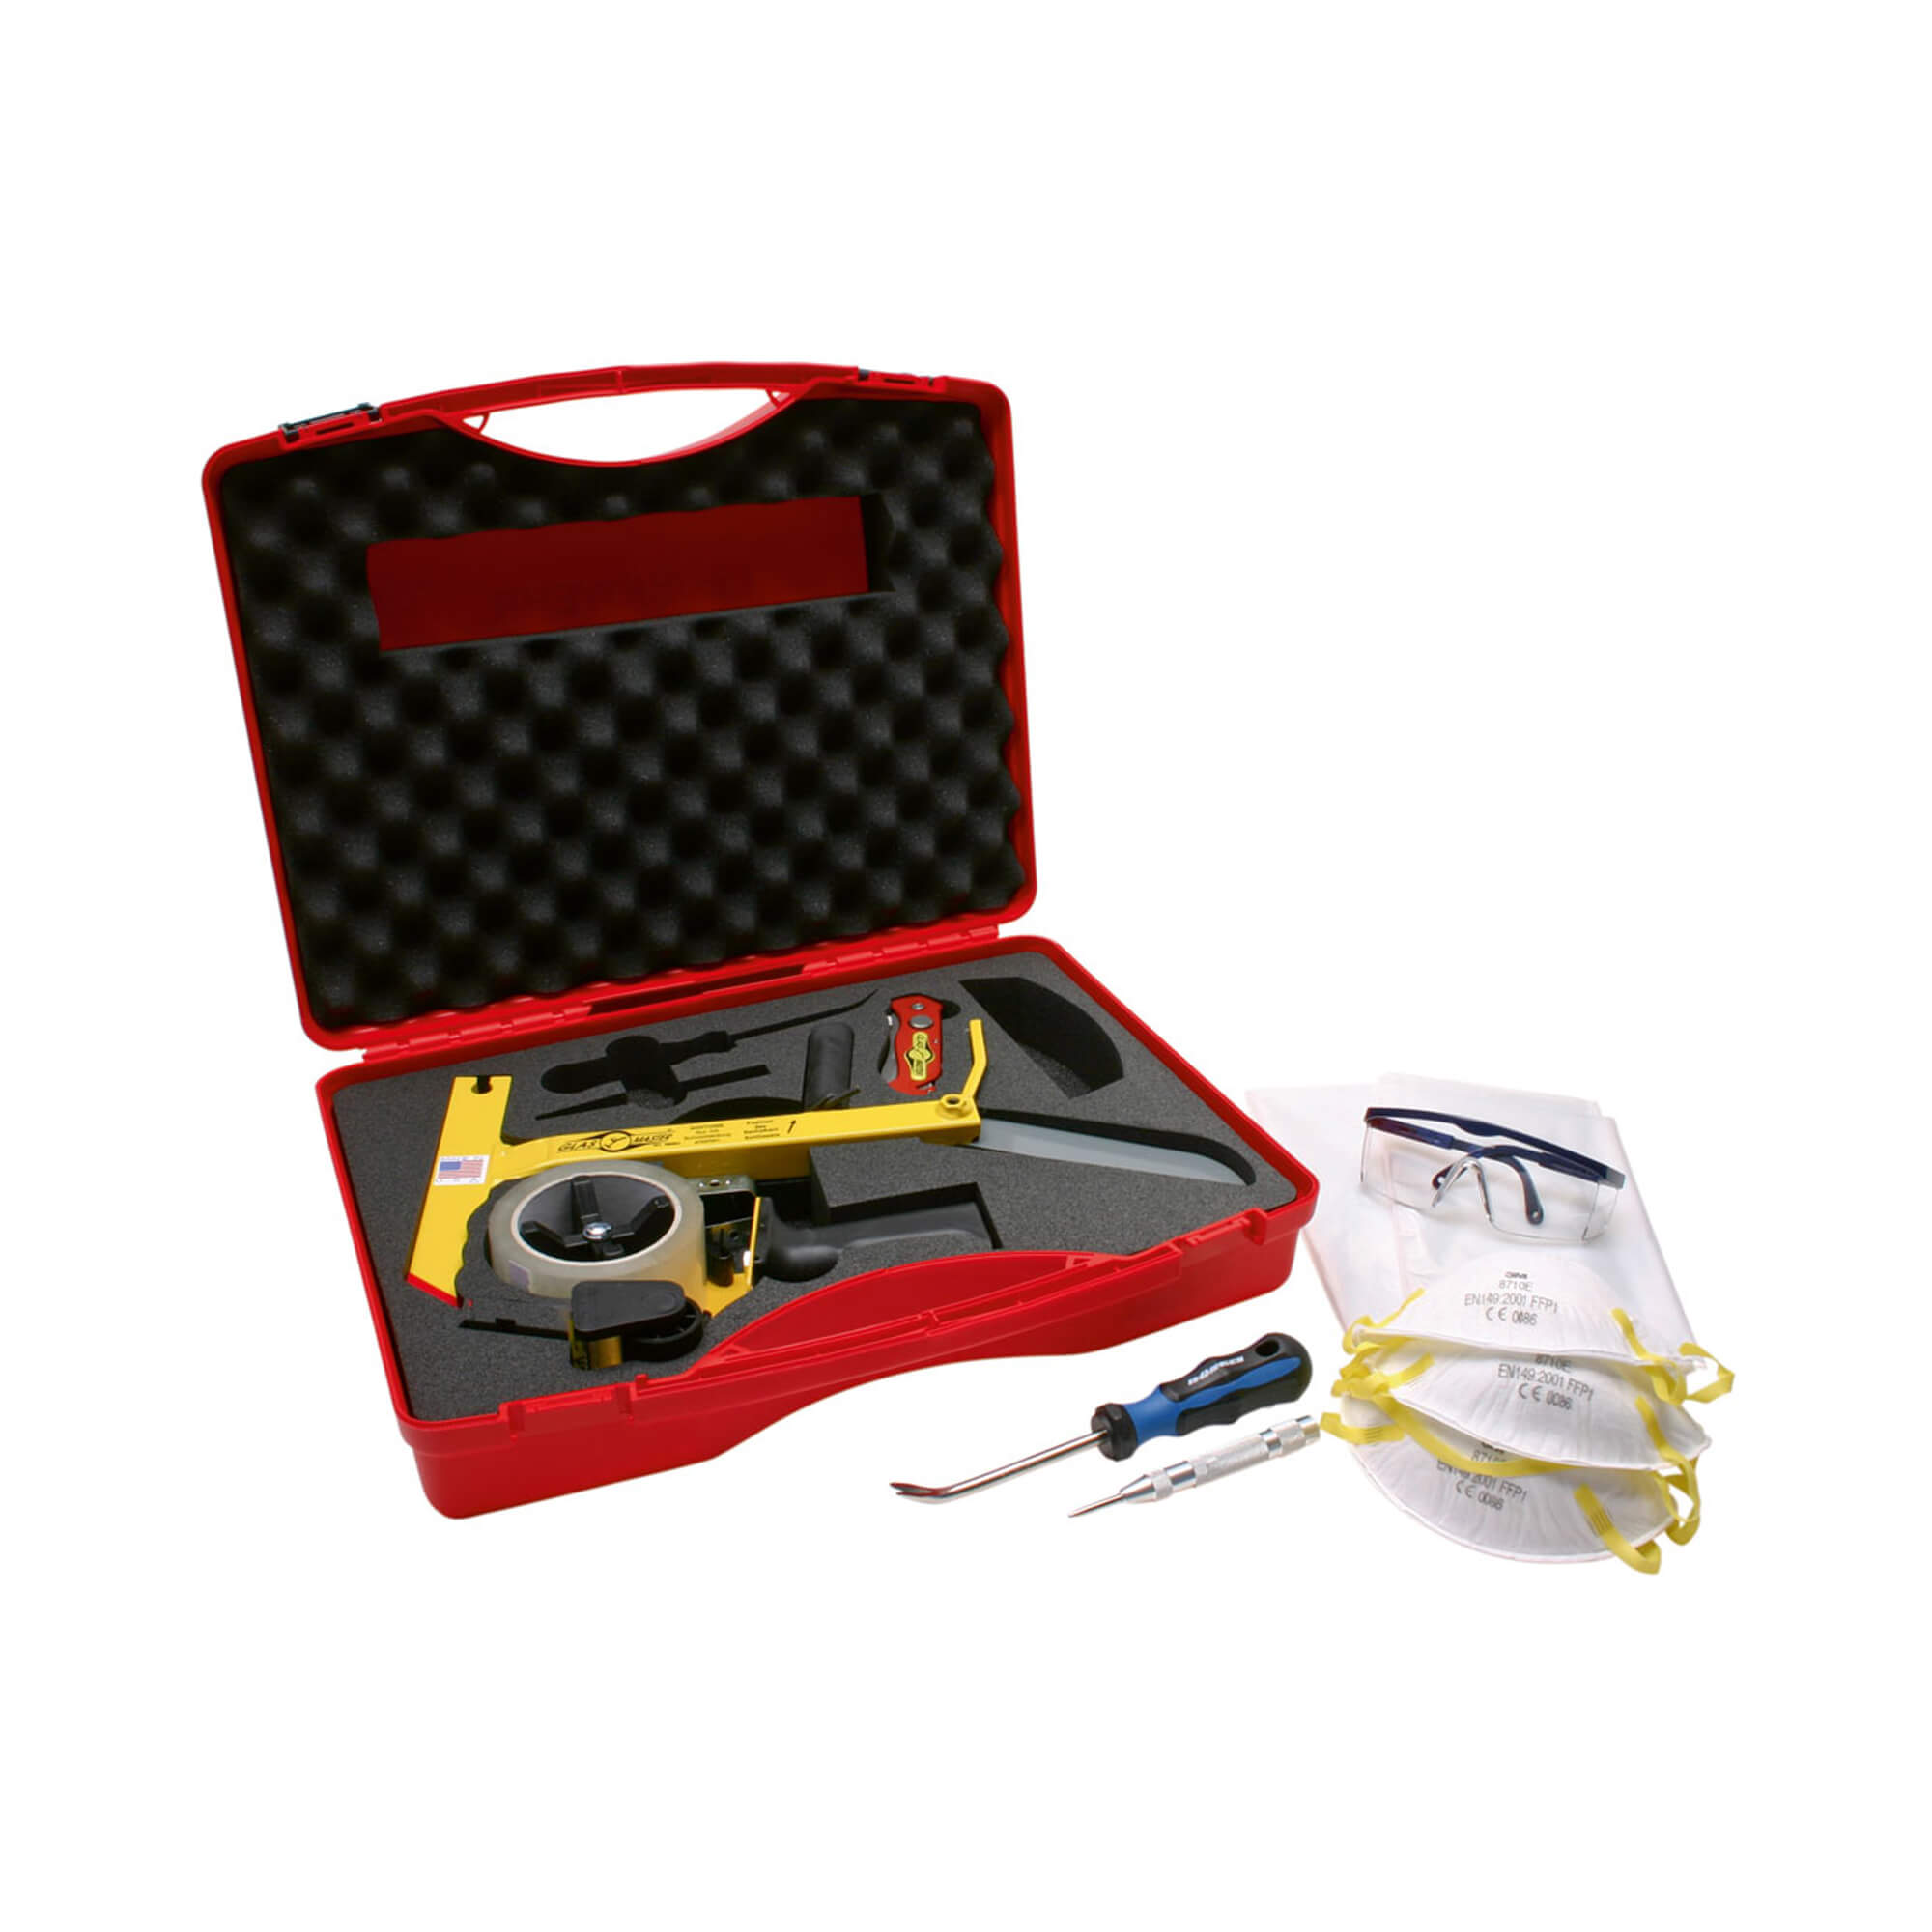 Glas-Master extrication tool for vehicle glass removal